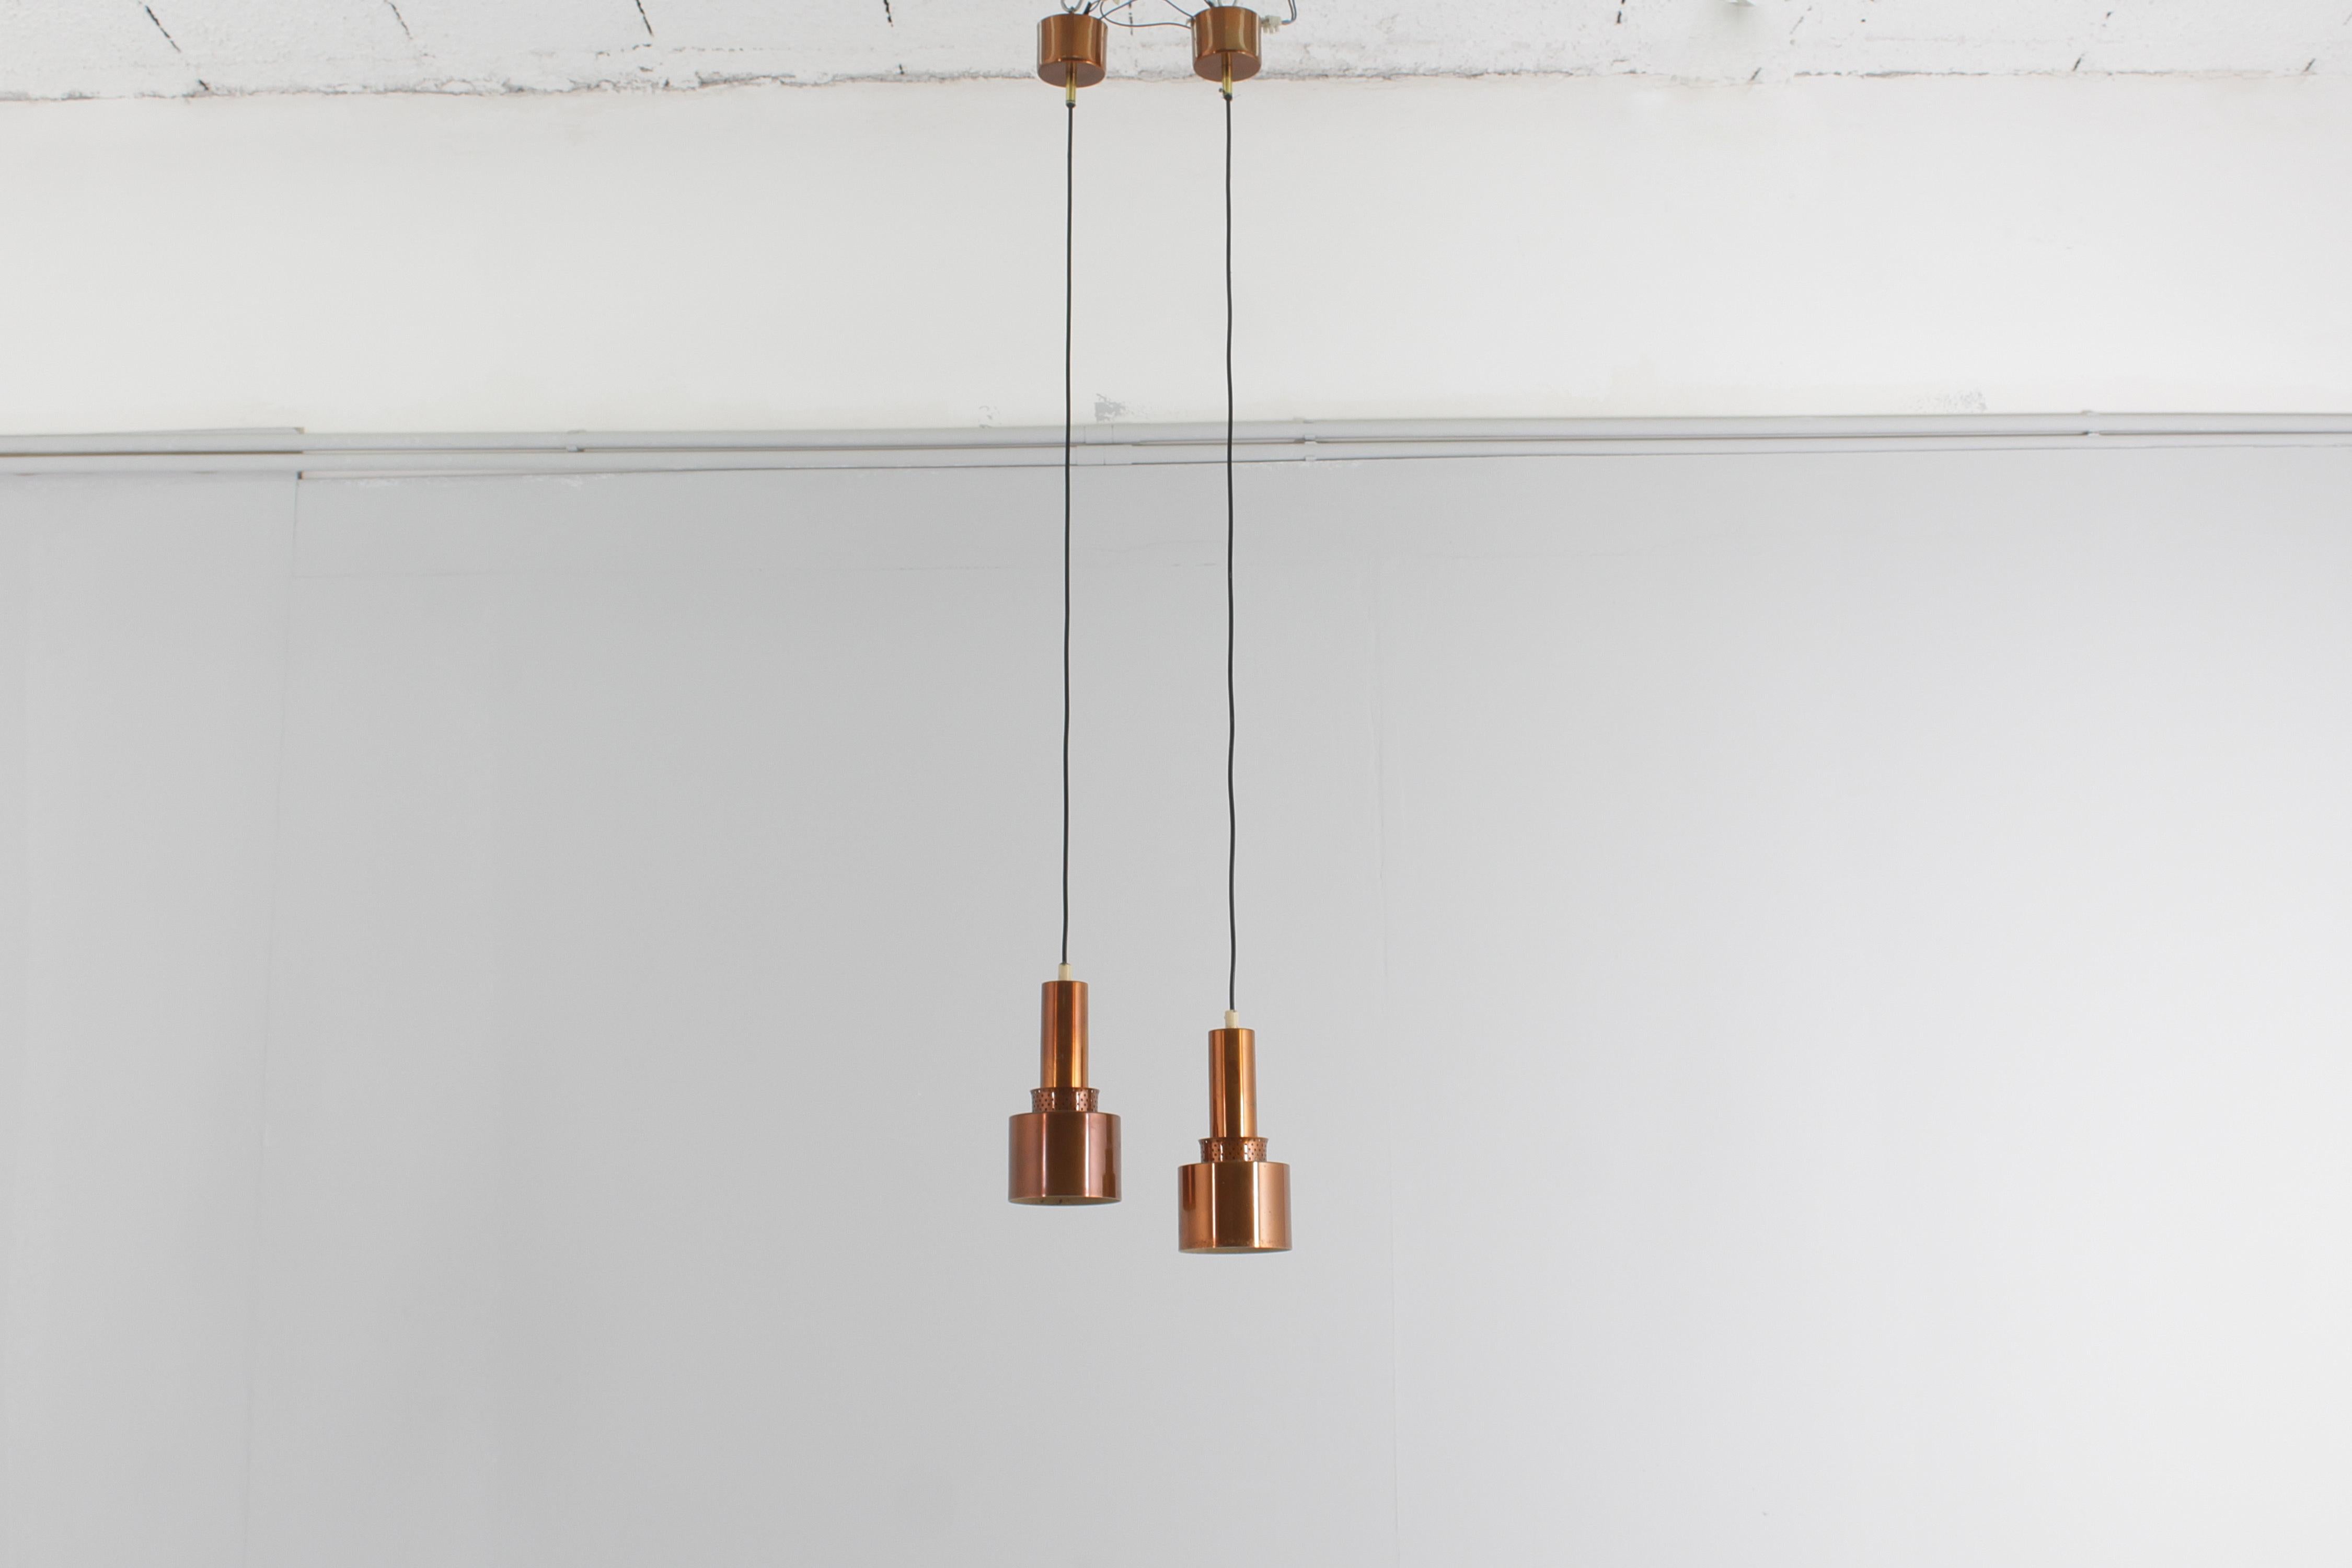 Wonderful set of 2 pendants model T292 in copper by Hans-Agne Jakobsson for Hans-Agne Jakobsson AB Markaryd. This model was designed in 1958 and is quite rare. The light spreads beautifully from the perforated copper above the bulb. 